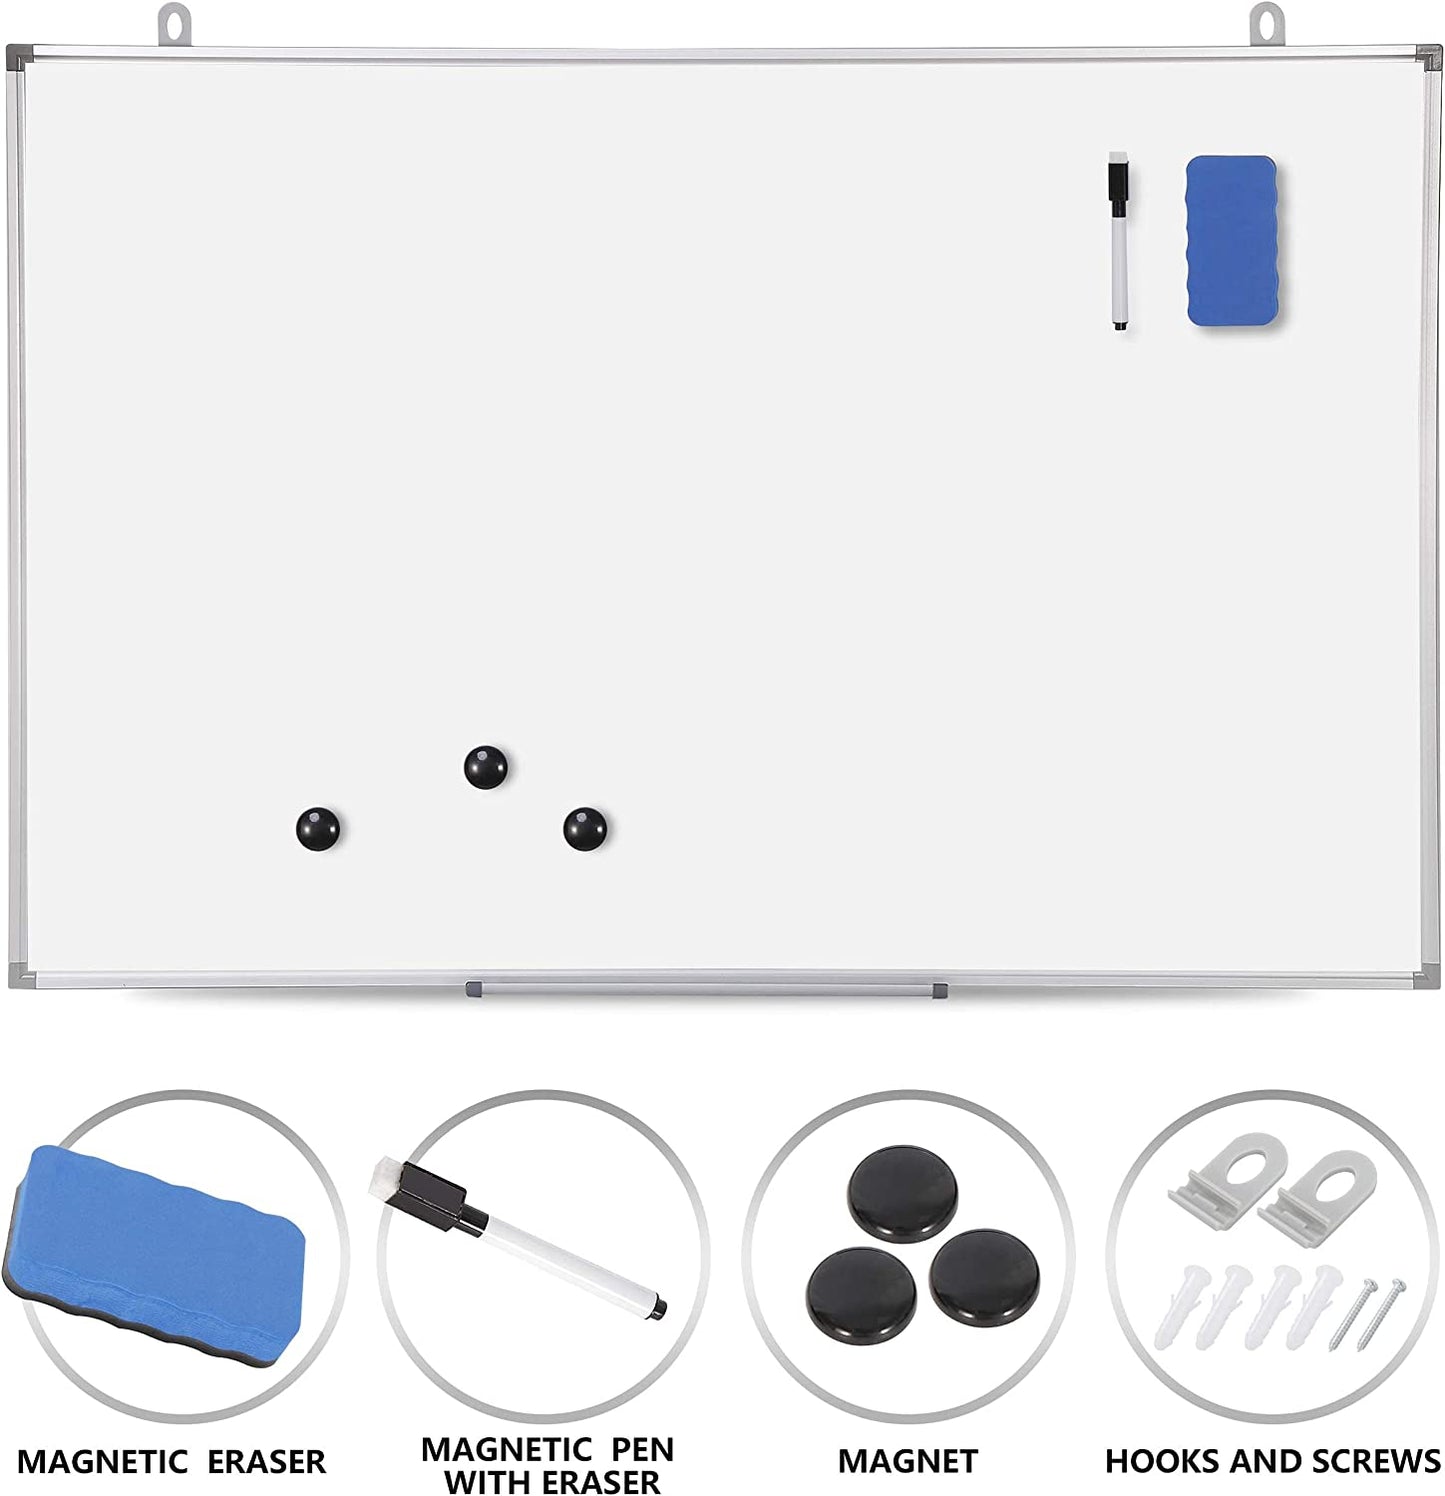 Magnetic Dry Erase Board, 36 x 24 inch Whiteboard for Wall, Aluminum Frame, Wall Hanging White Board with Eraser Marker Pen for Home Office School